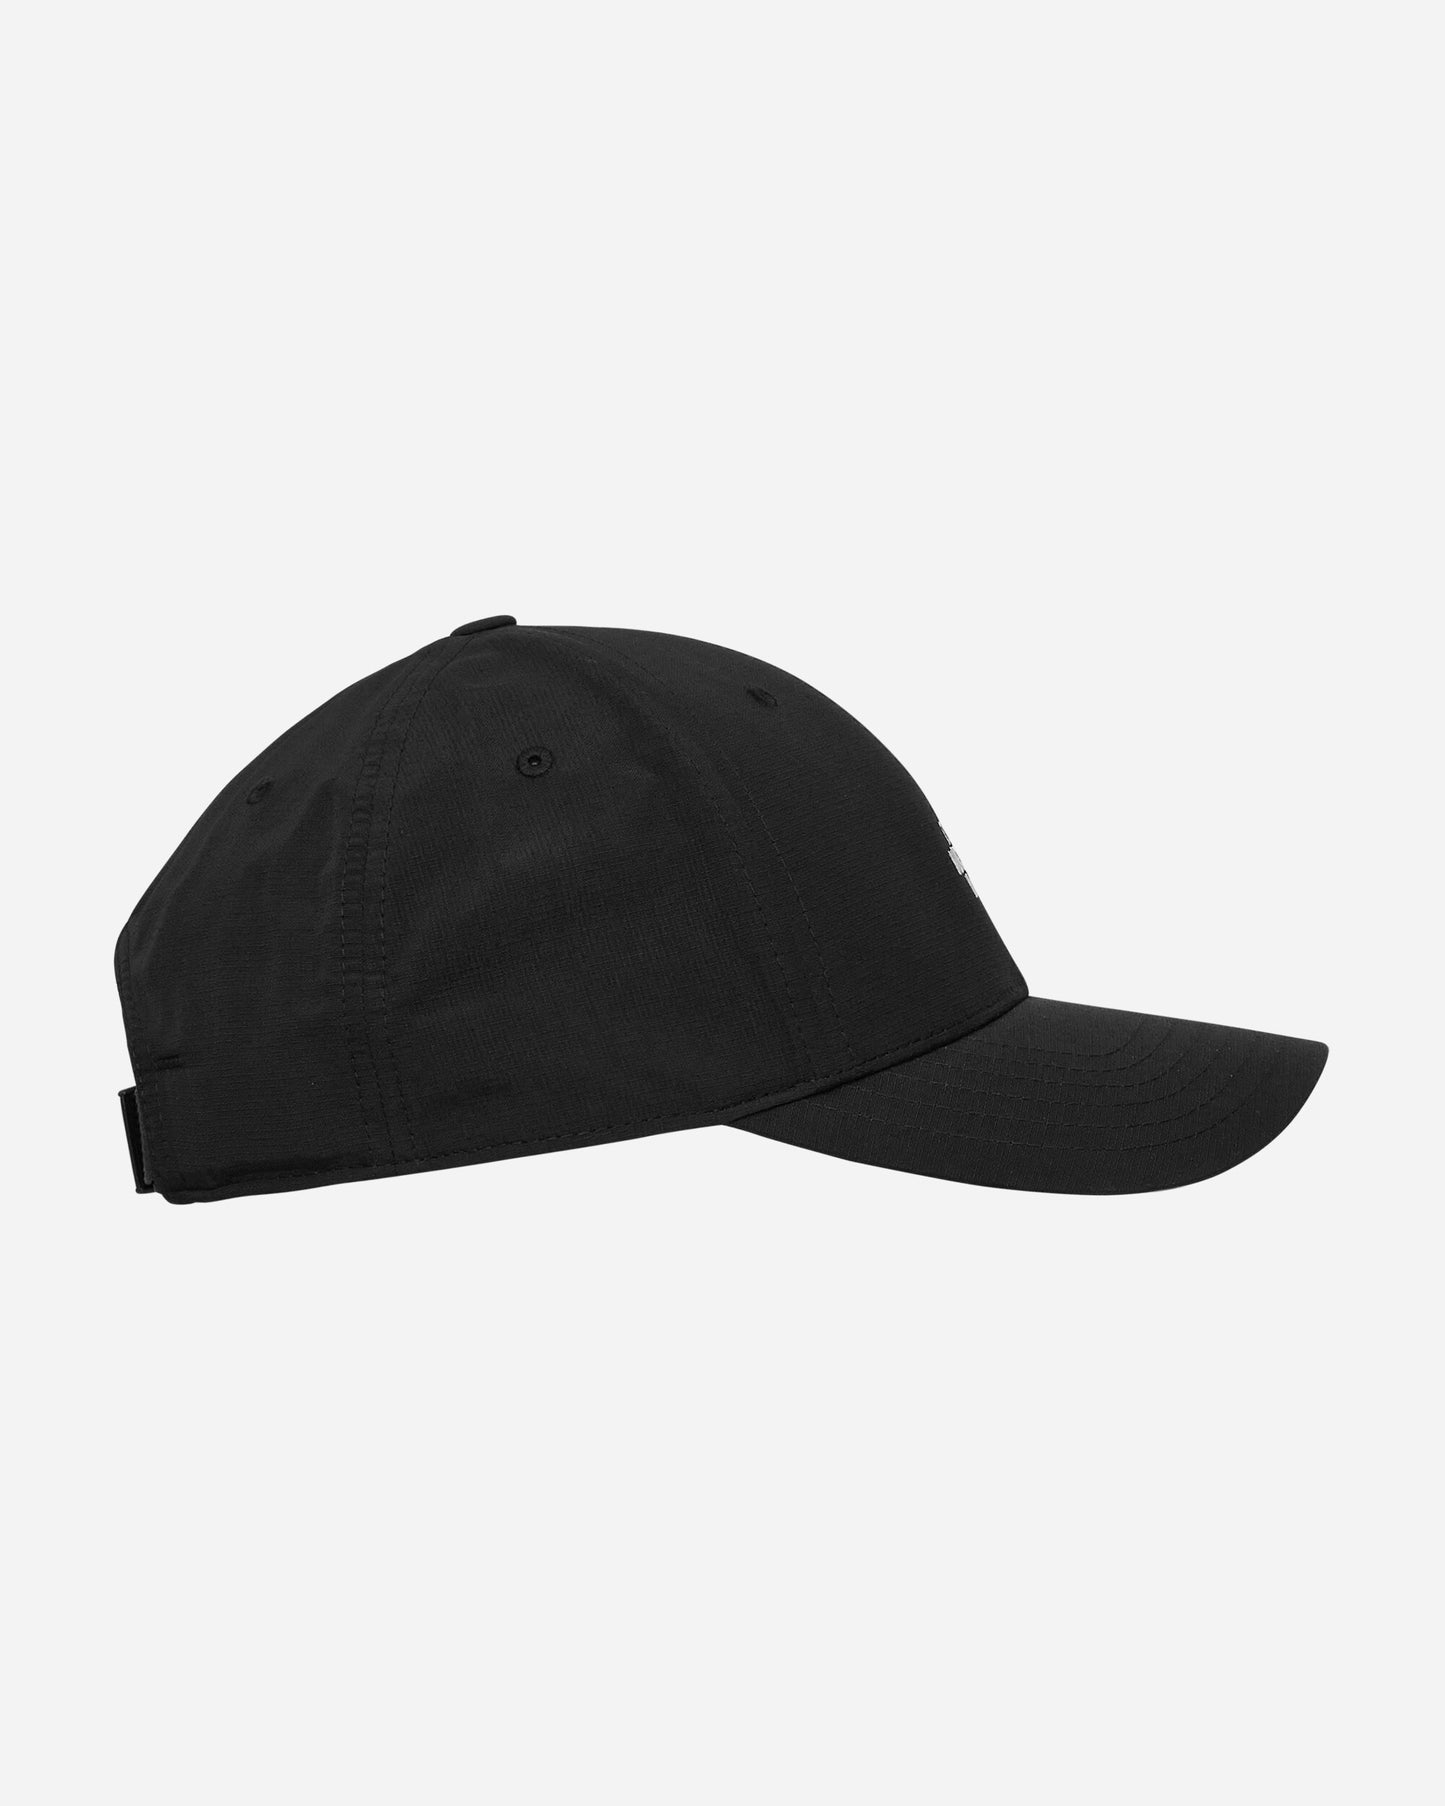 The North Face 66 Tech Hat Tnf Black/Tnf White Hats Caps NF0A7WHC KY41